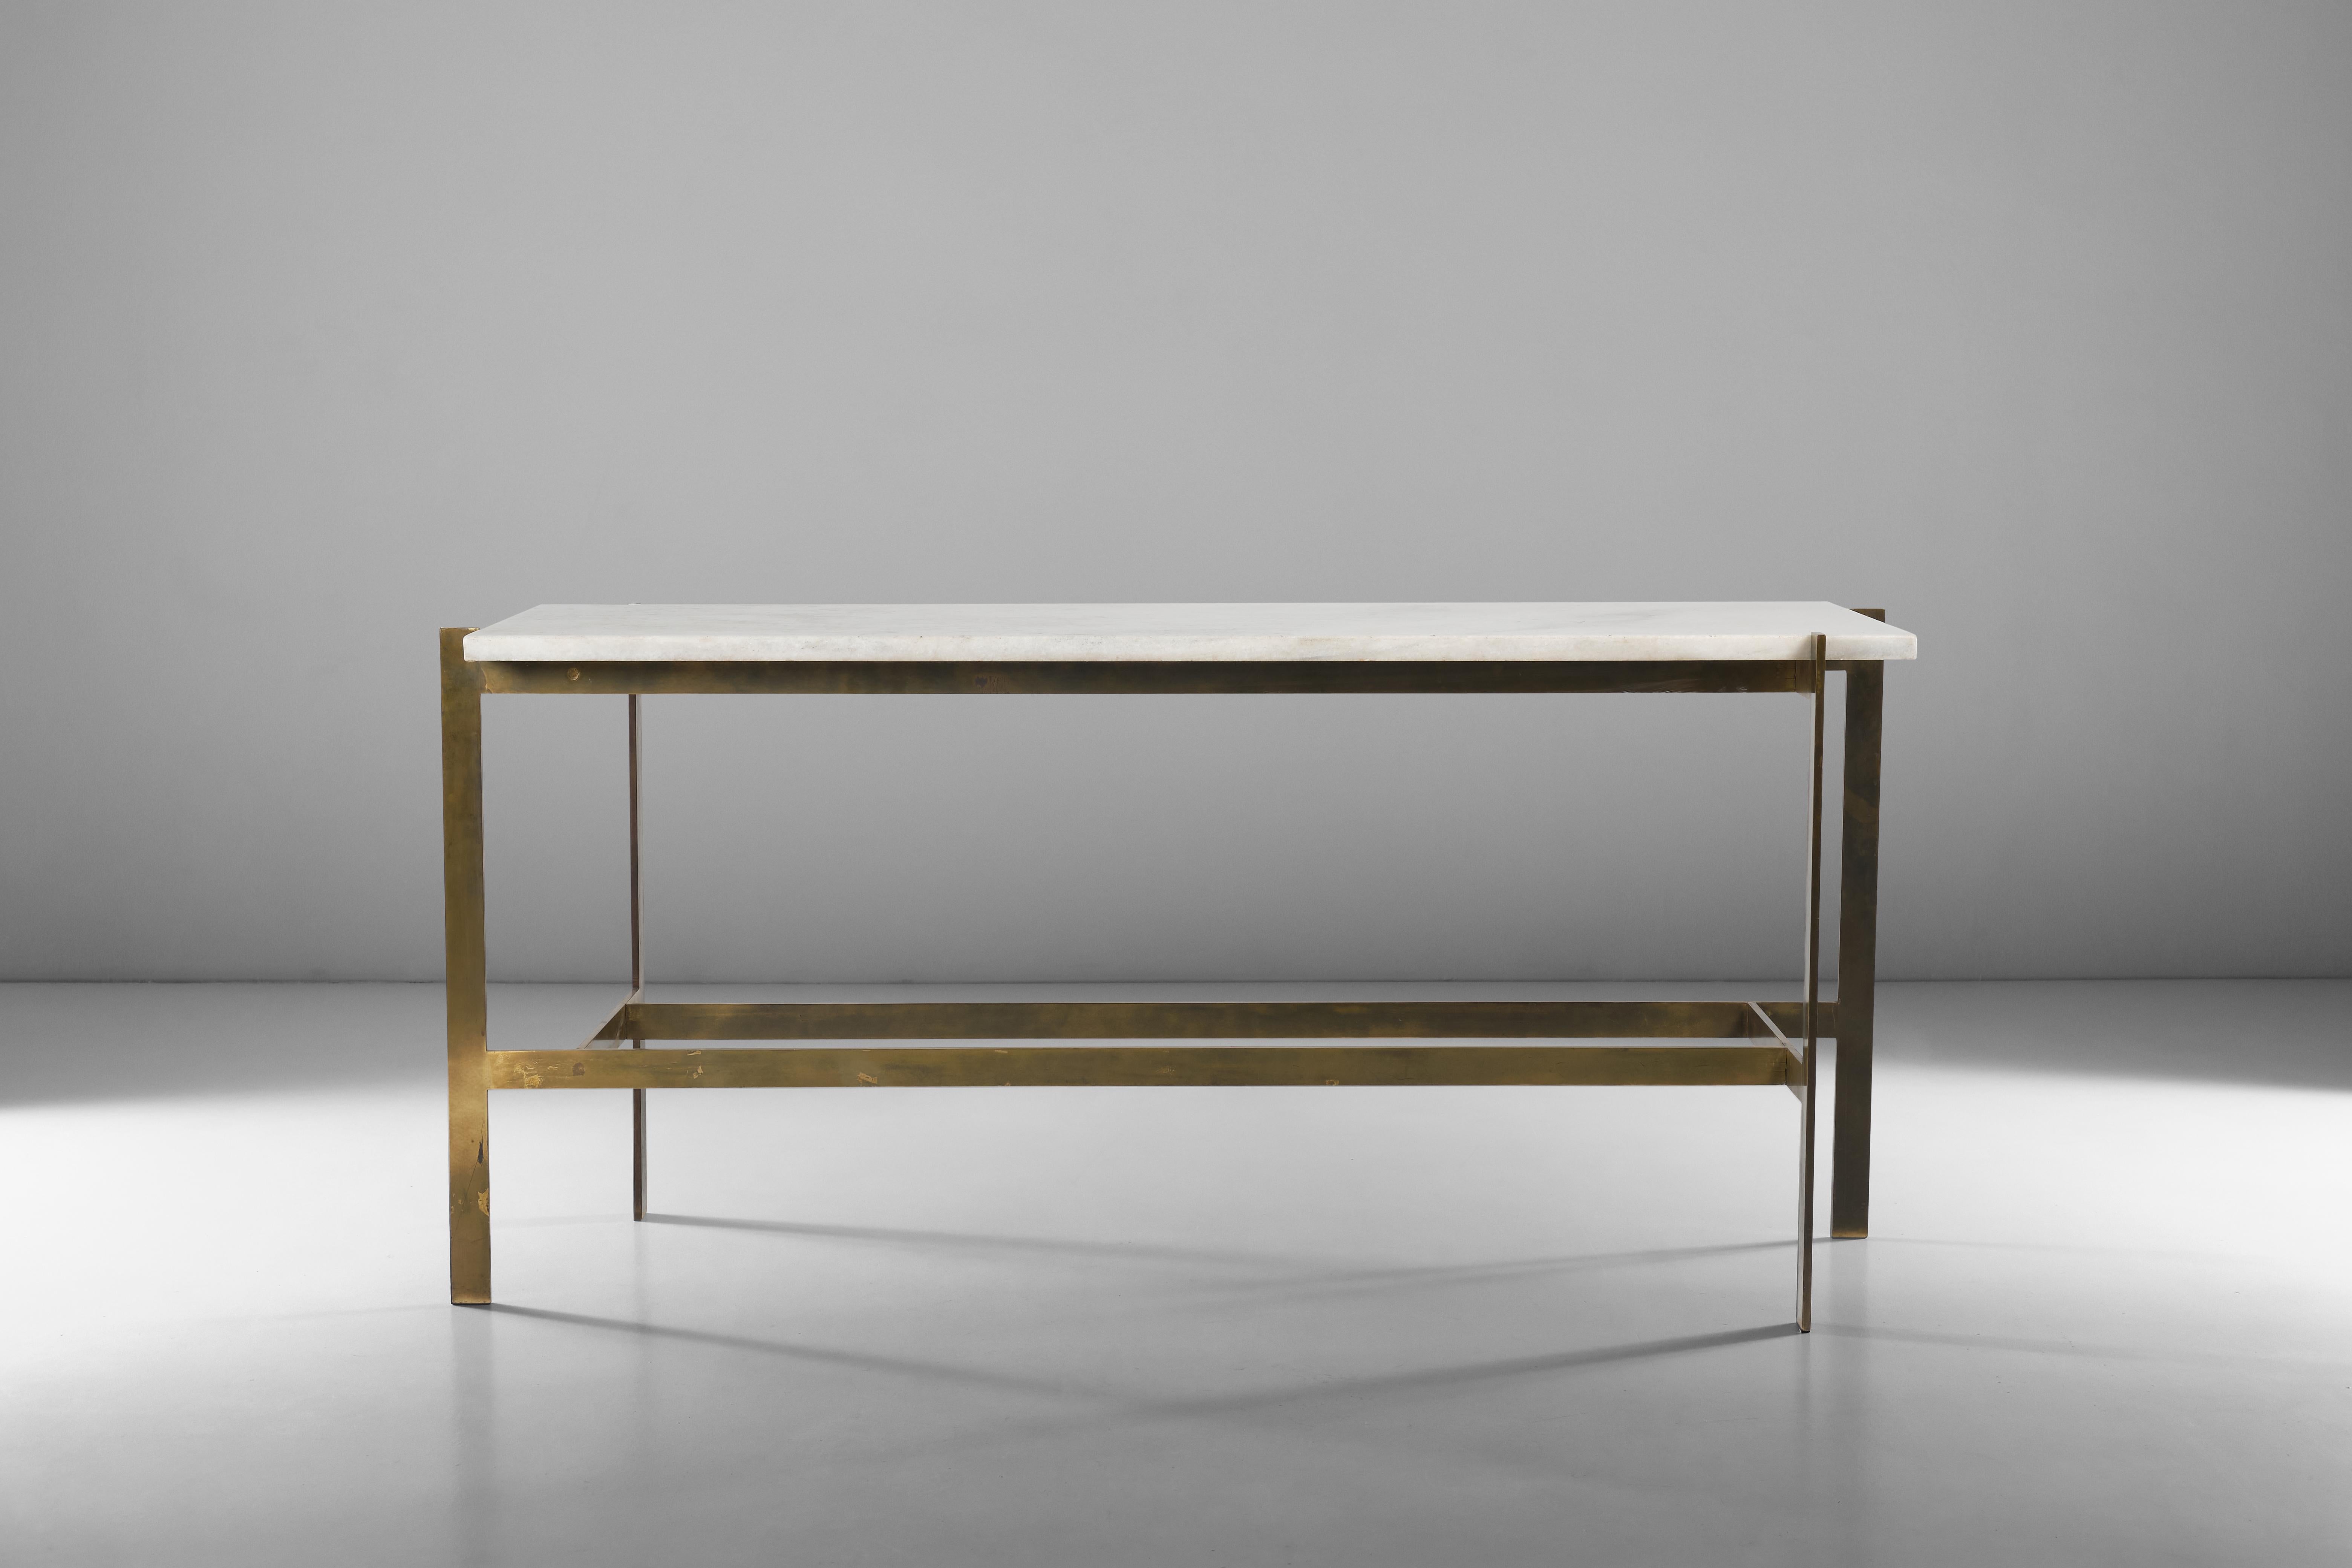 Sleek and stylish, this console features a magnificent white marble top. The brass base attached to it conveys stability and elegance at the same time thanks to attention to details and an unmistaken sense of proportions.
Attributed to Romeo Rega,